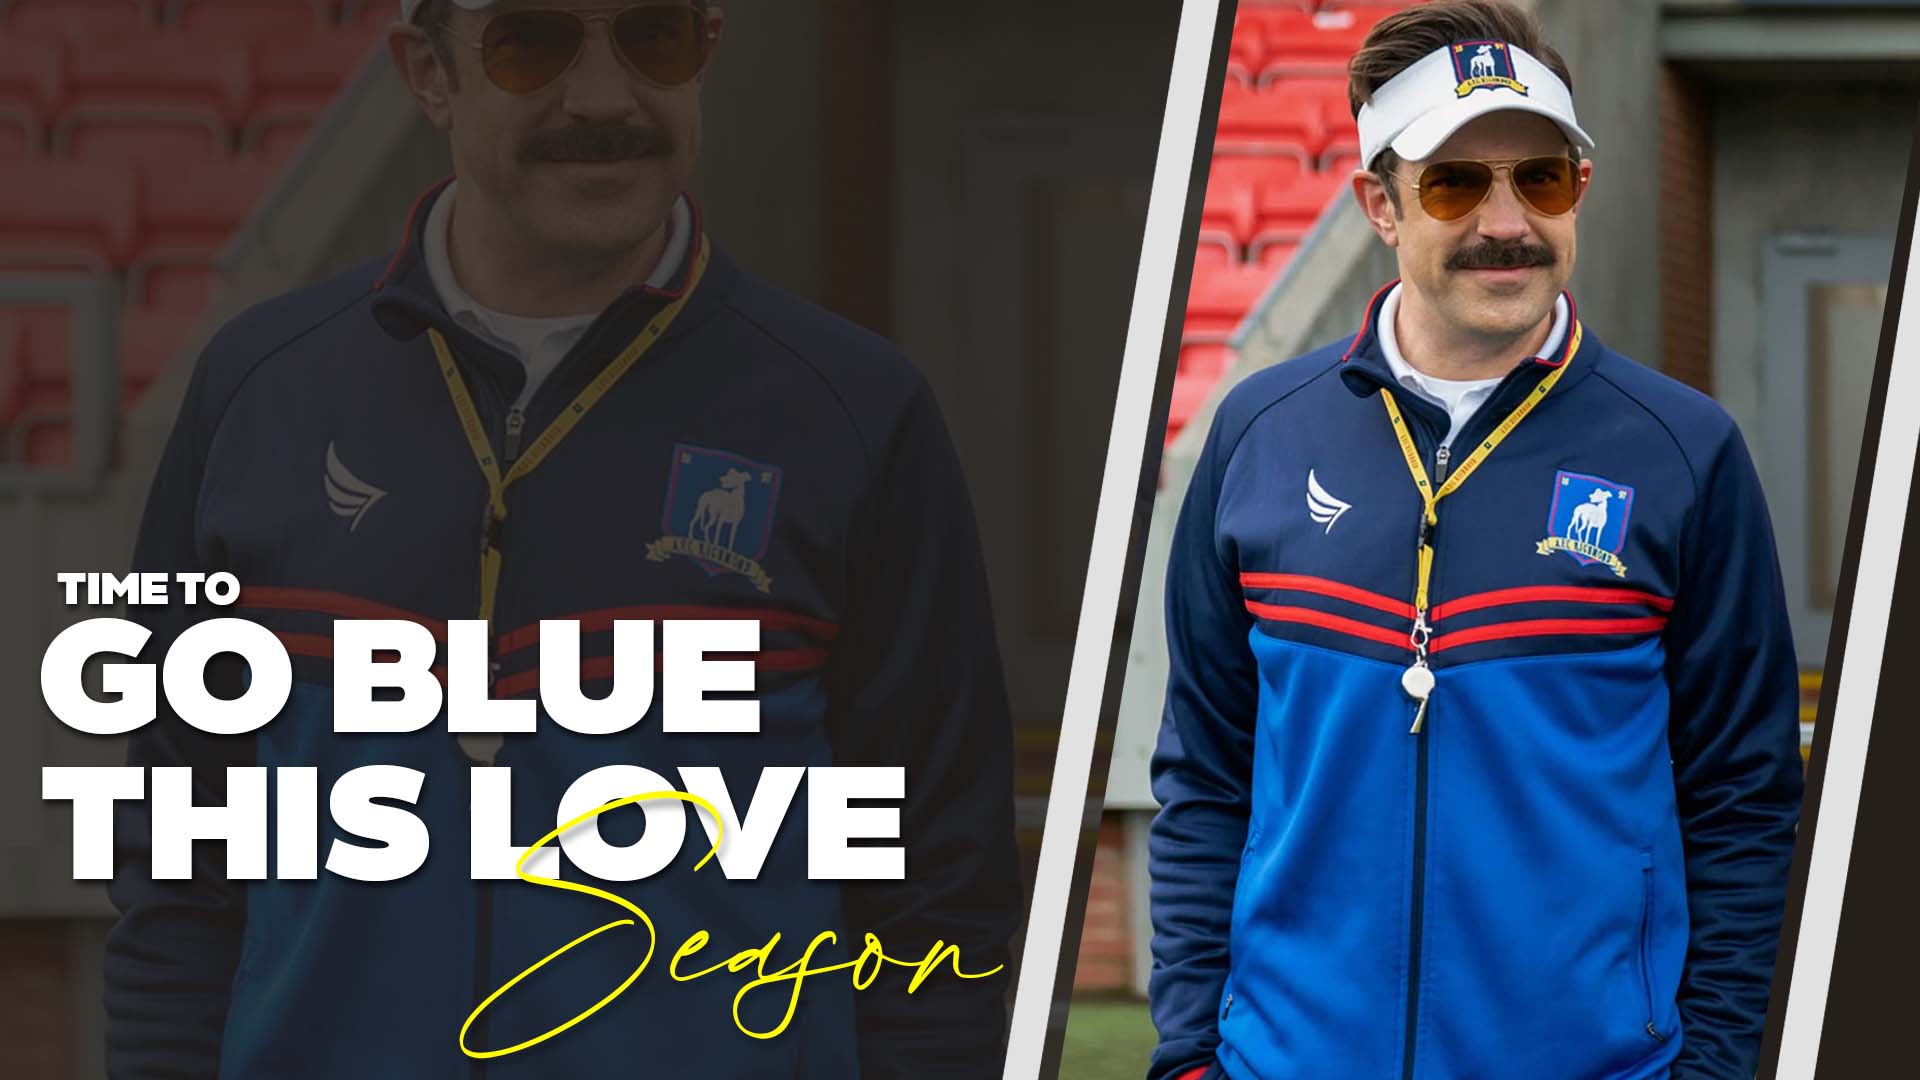 Time To Go Blue This Love Season!